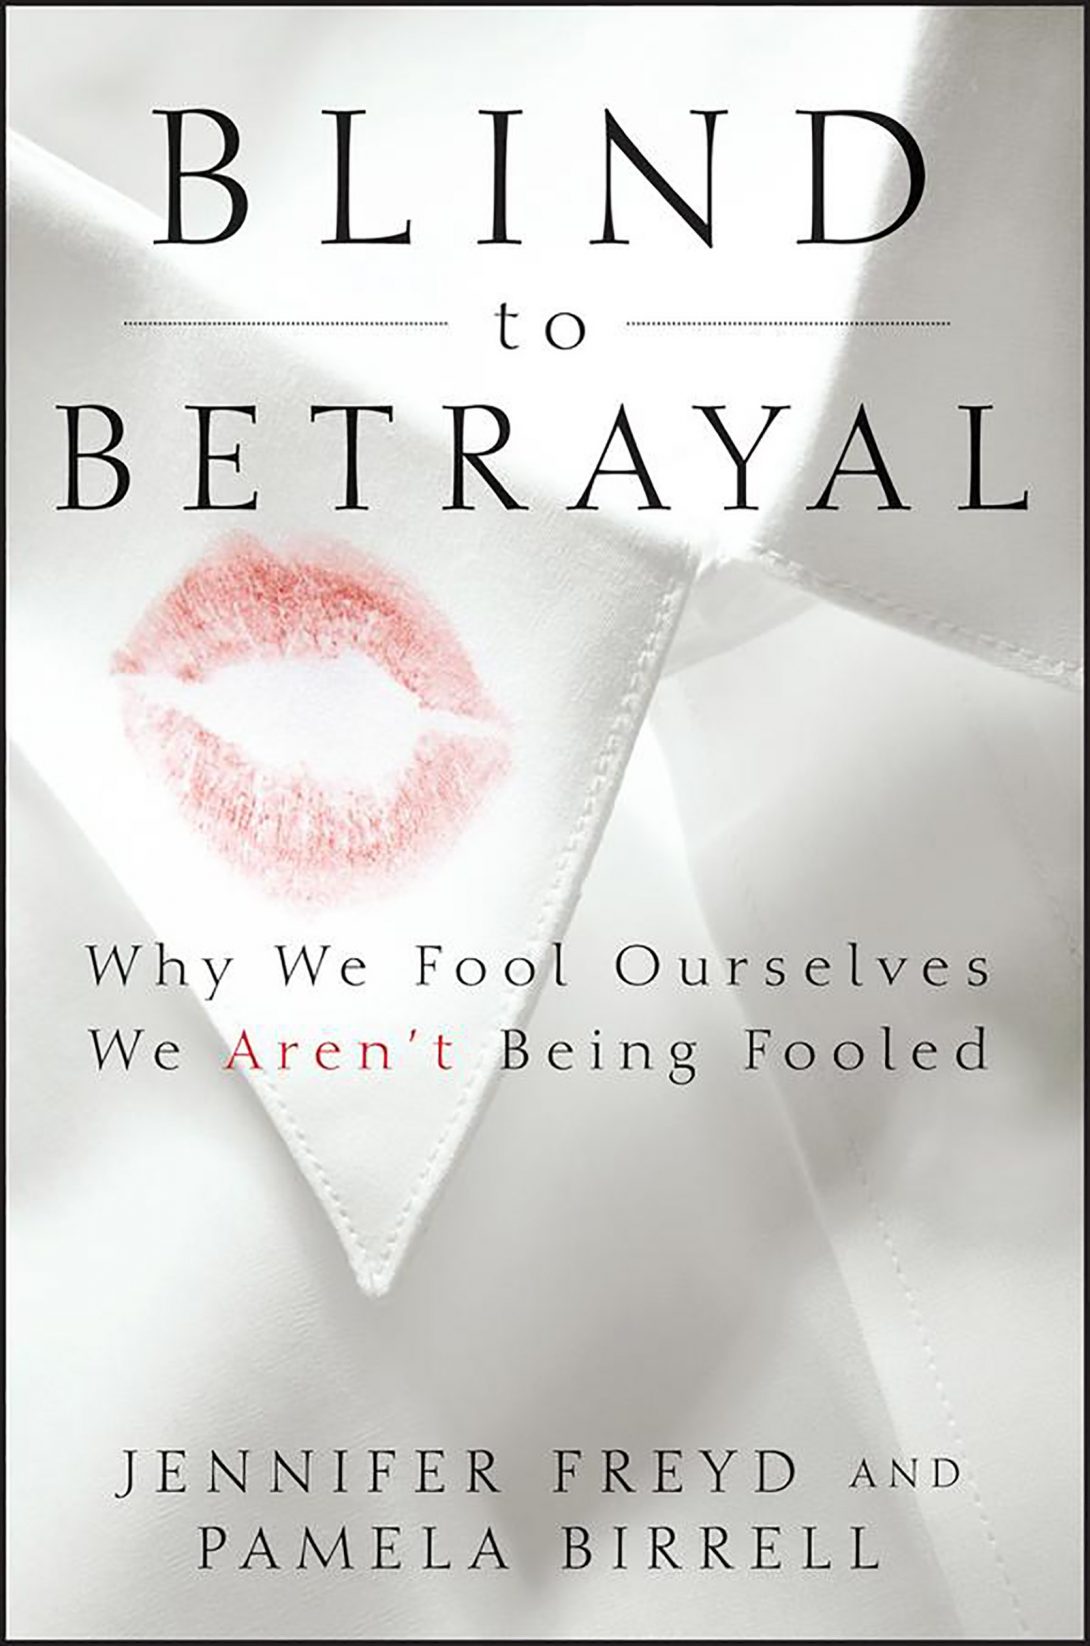 The book jacket of _Blind to Betrayal_, which features a kiss-shaped red lipstick stain on a white shirt collar.